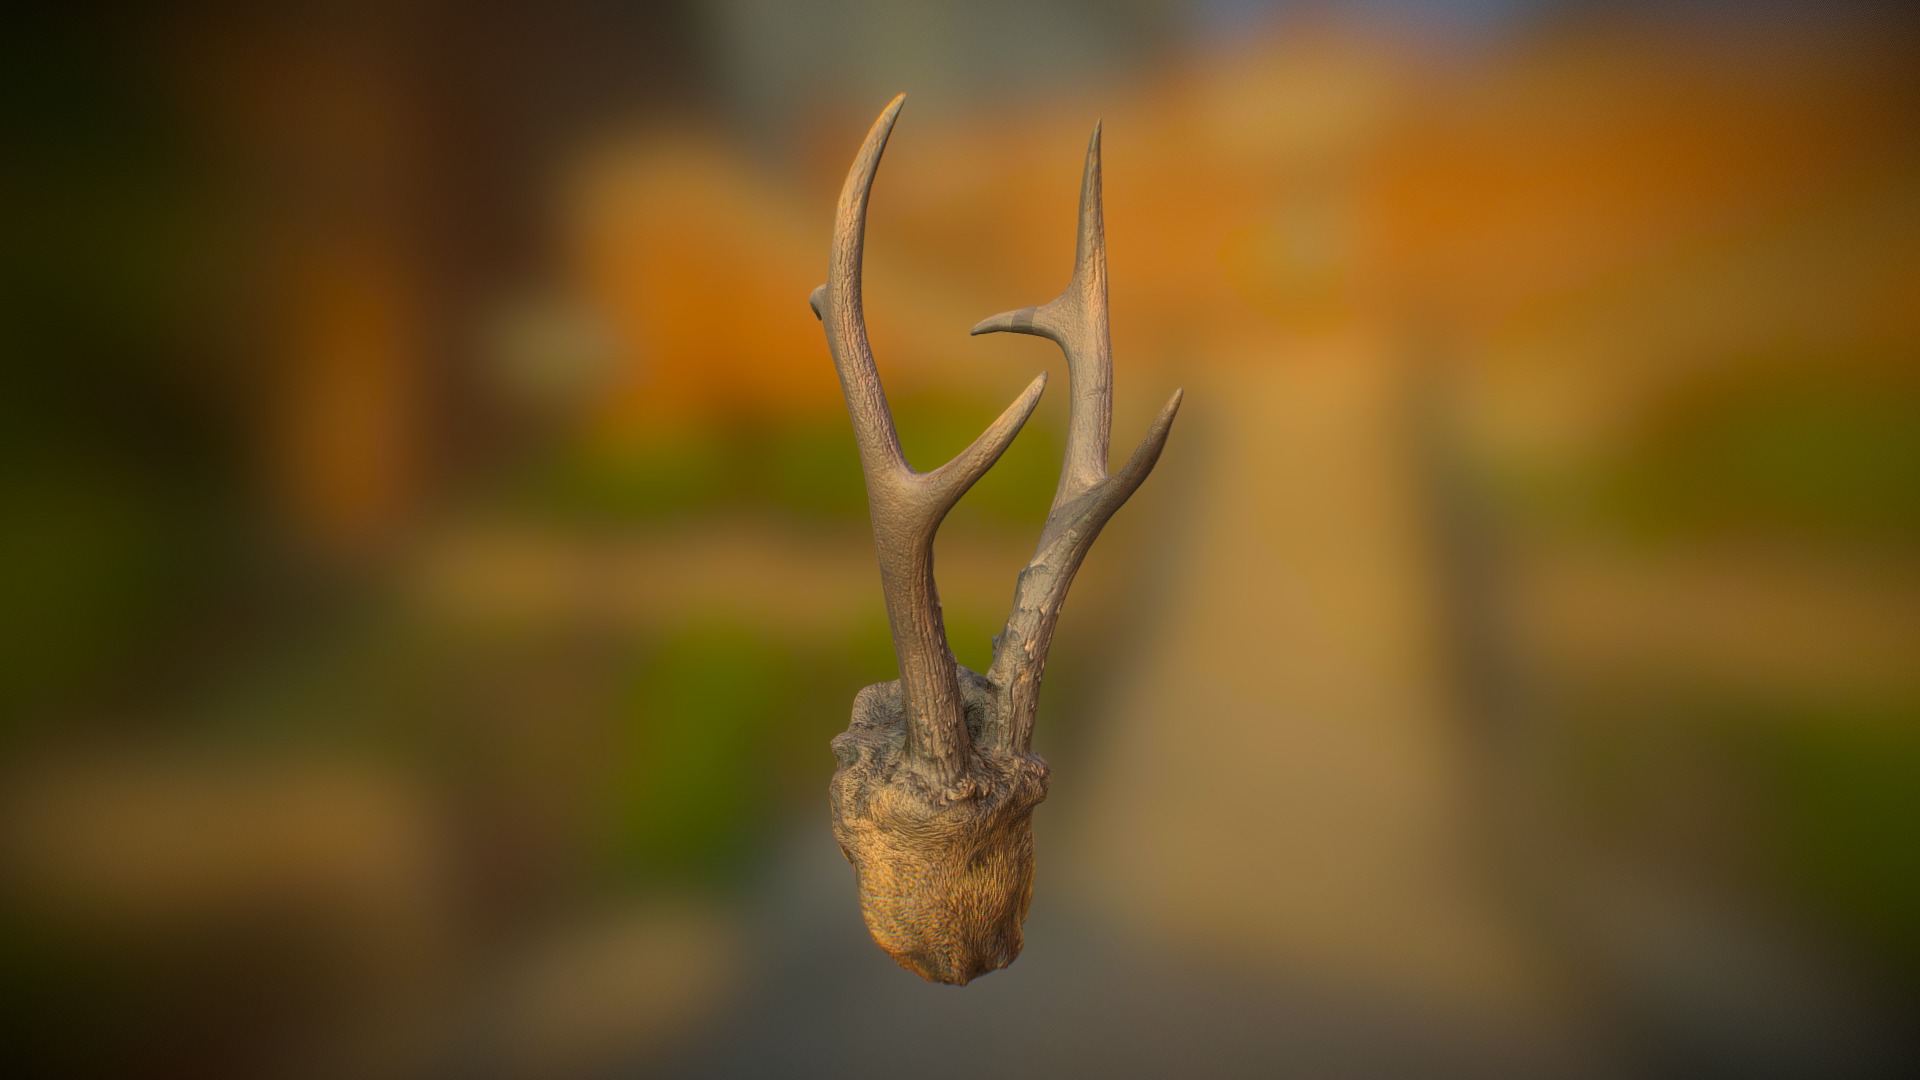 3D model Deer Horns Trophy - This is a 3D model of the Deer Horns Trophy. The 3D model is about a snail on a branch.